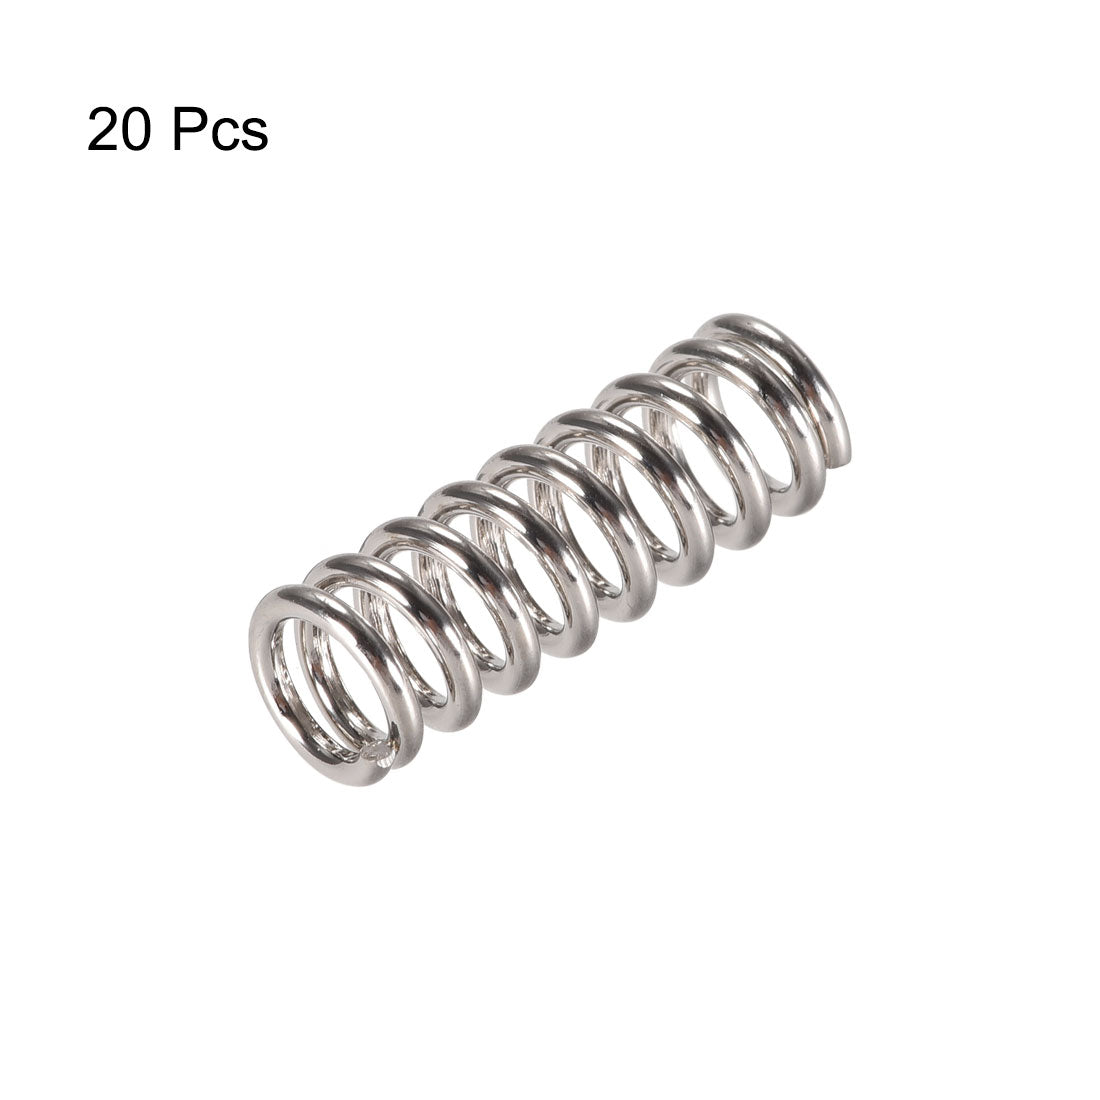 Uxcell Uxcell Heated Bed Springs for 3D Printer Extruder Compression Spring, 7.5 x 20 mm 40pcs